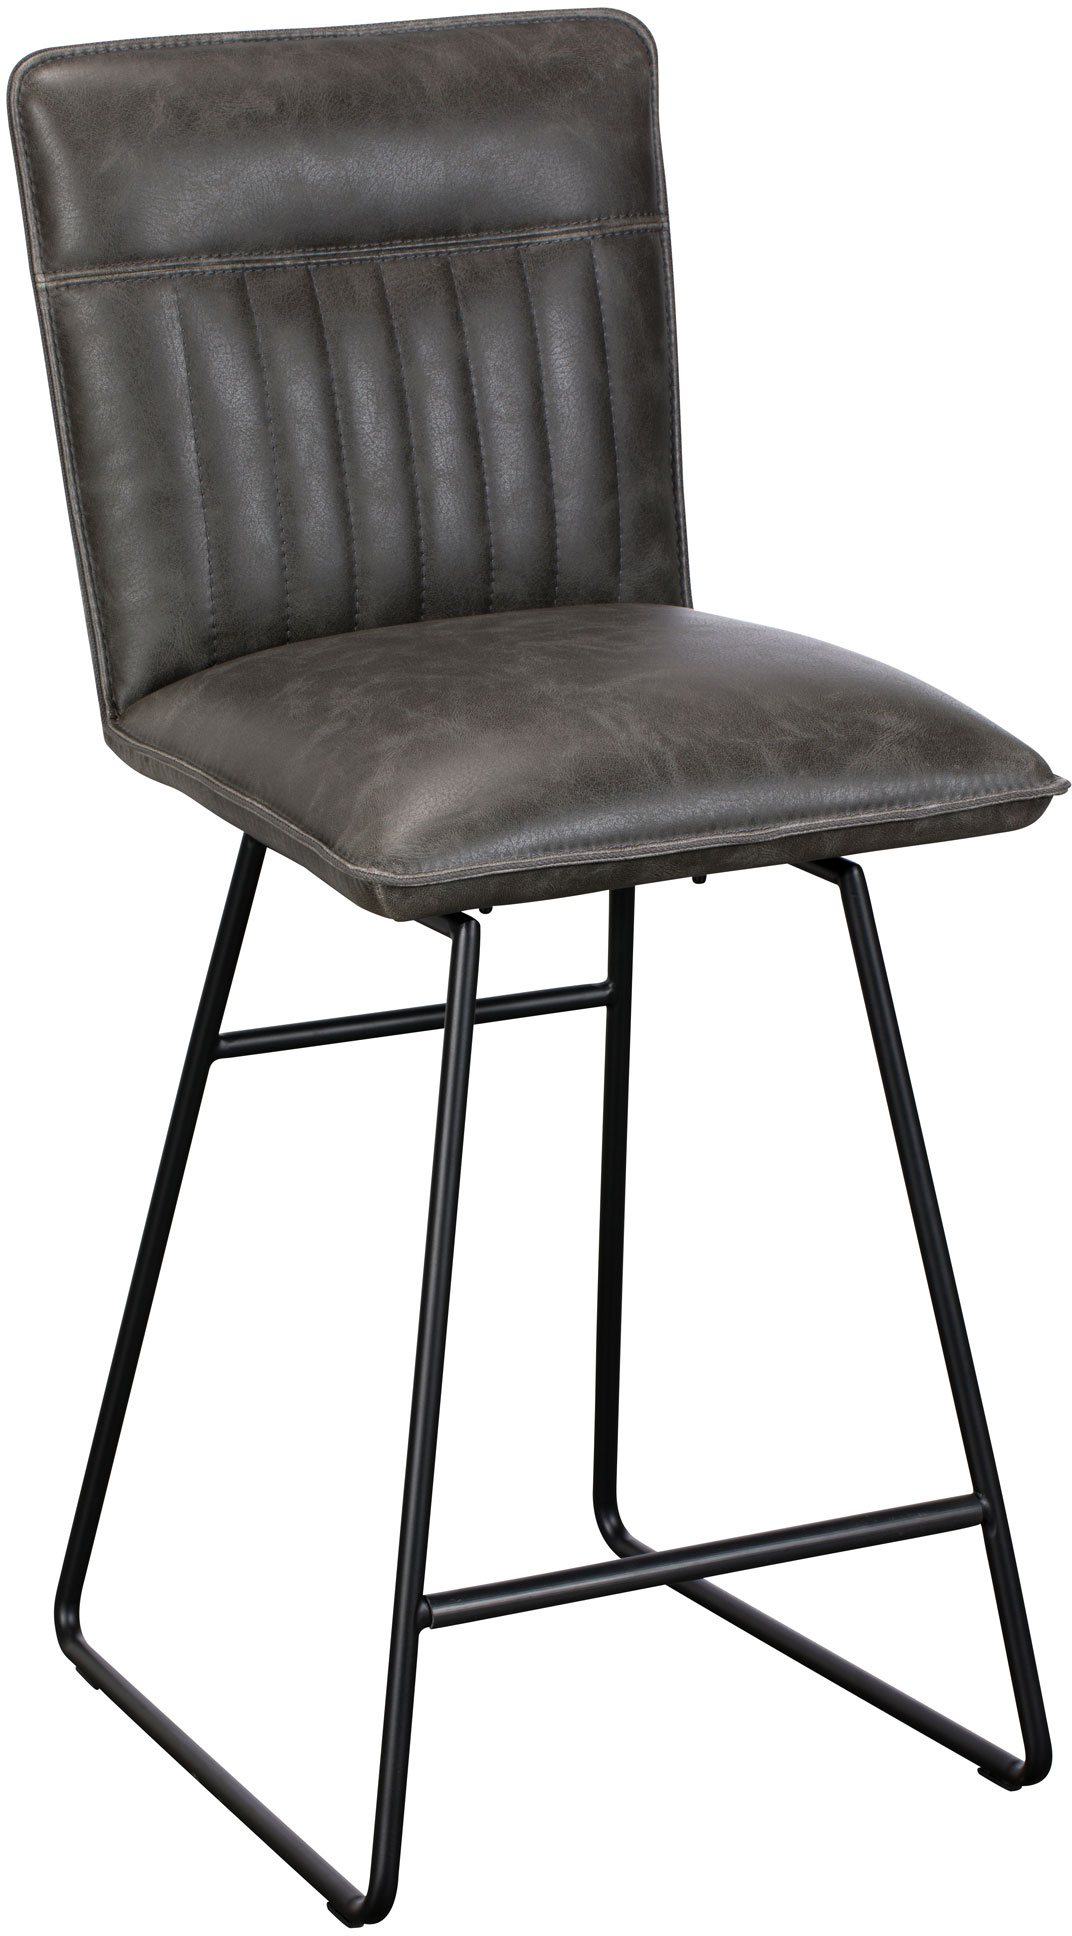 Cooper Swivel Bar Stool In Grey Faux, Faux Leather Bar Stools Grey